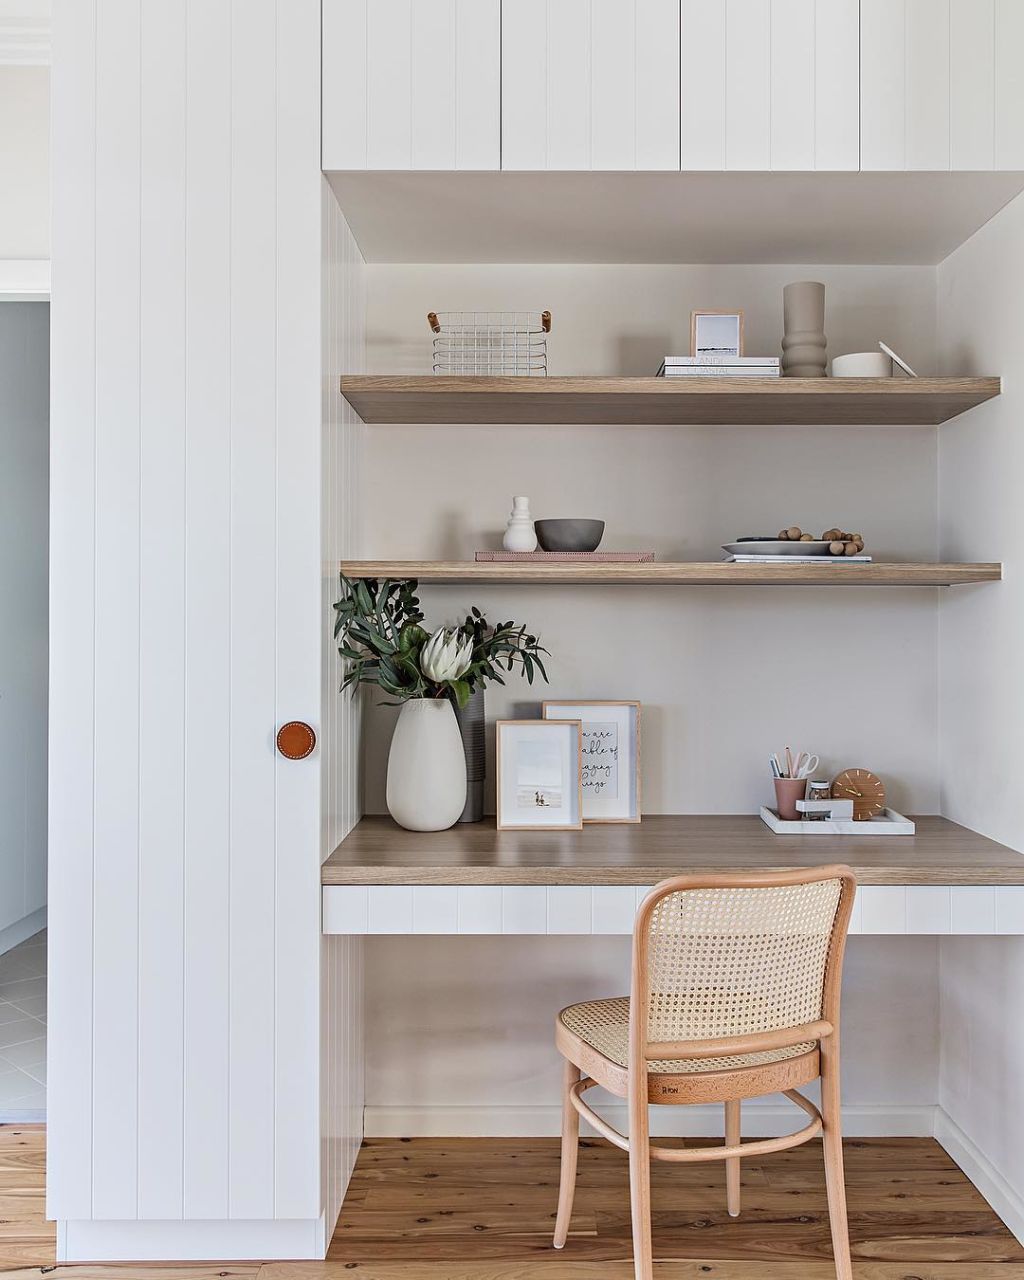 Short on space? Enter the cloffice, a dedicated office space in a closet, or wardrobe. Photo: The Stables/Catherine Heraghty